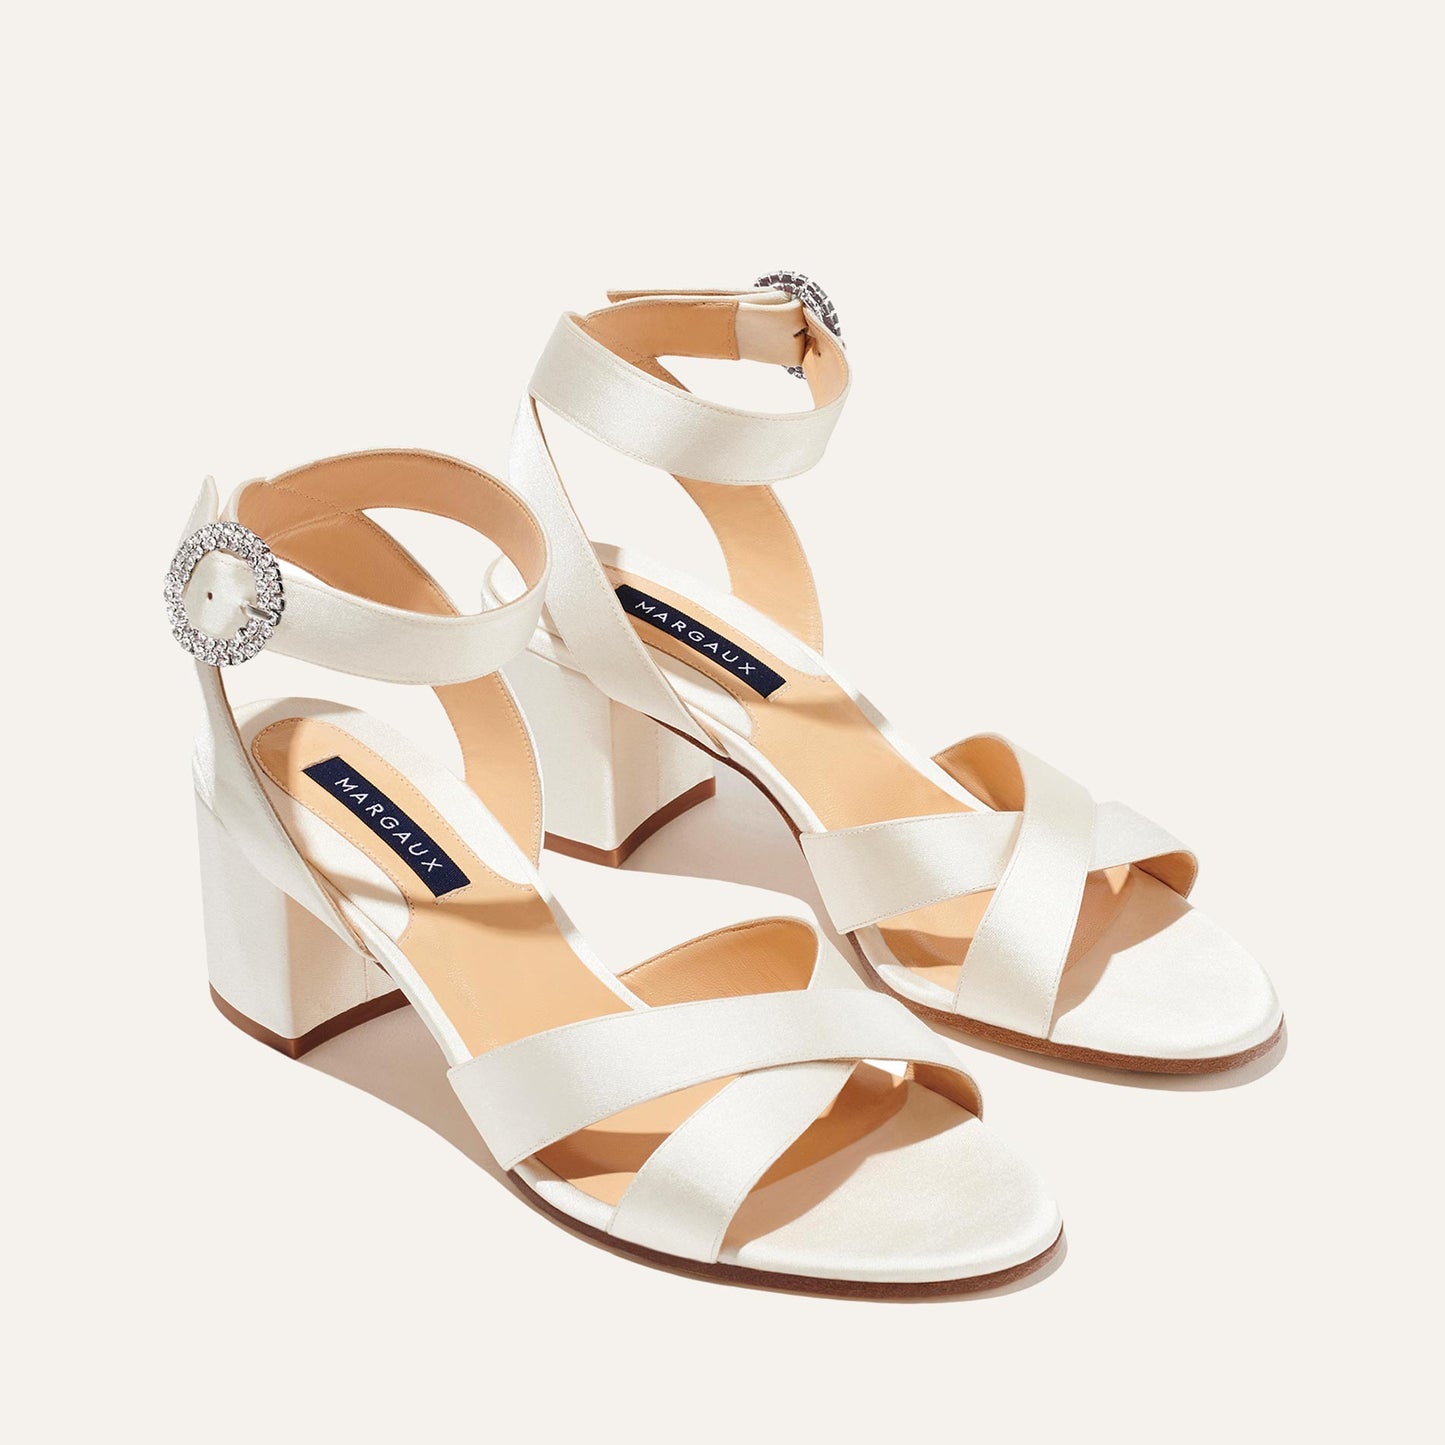 The City Sandal - Ivory Satin with Crystal Buckle